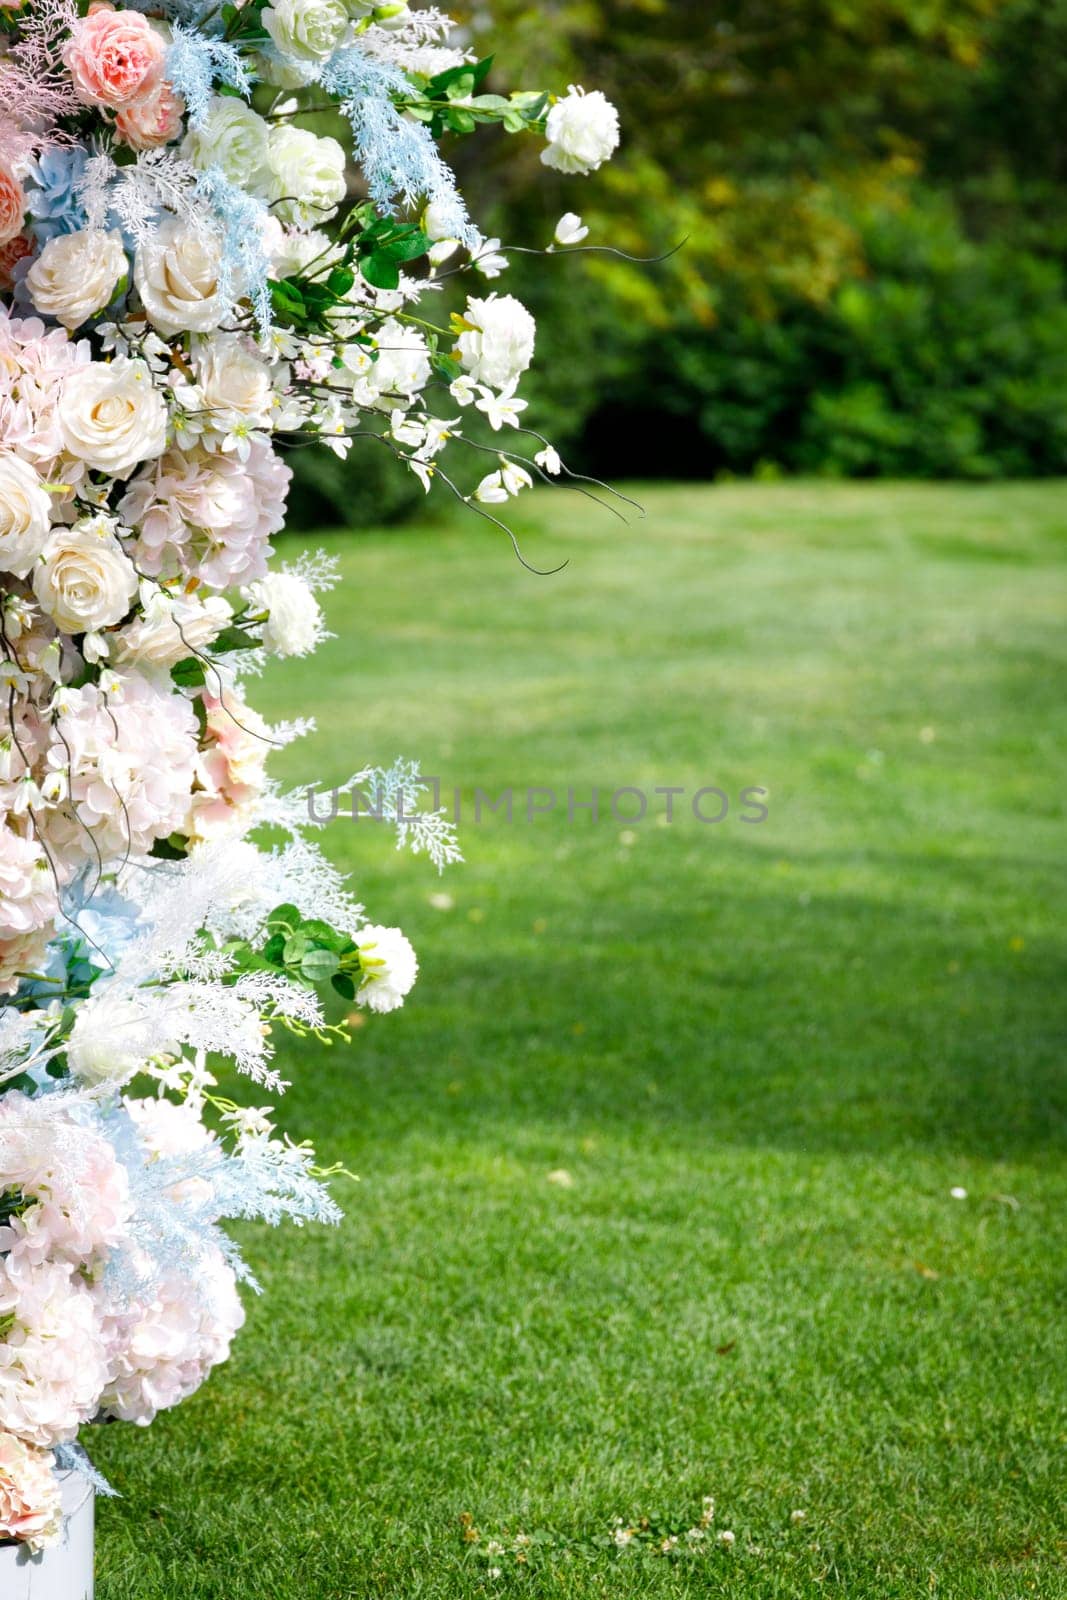 Flowers of different varieties on the left side of the photo in front of a green lawn field. High quality photo